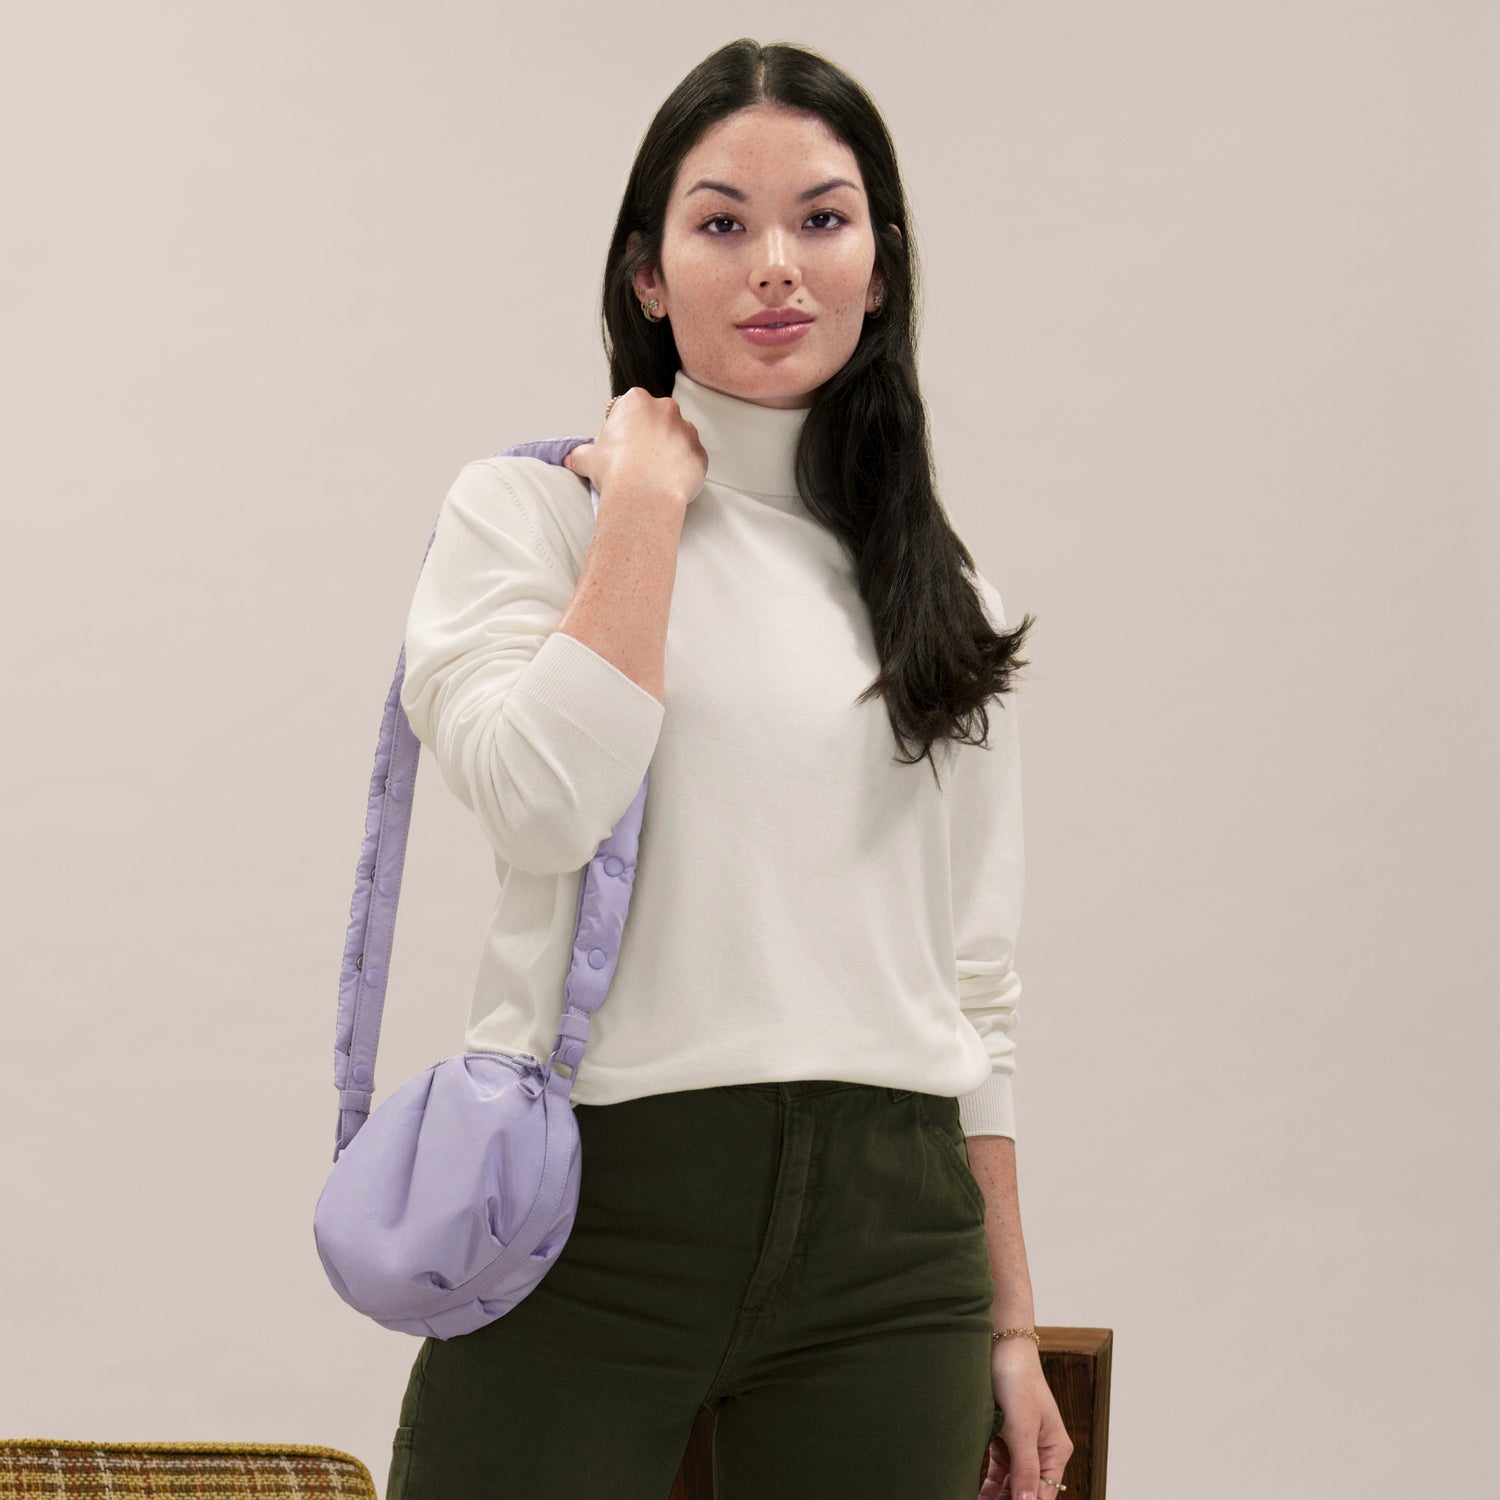 Micah Crossbody from Dagne Dover: Review 